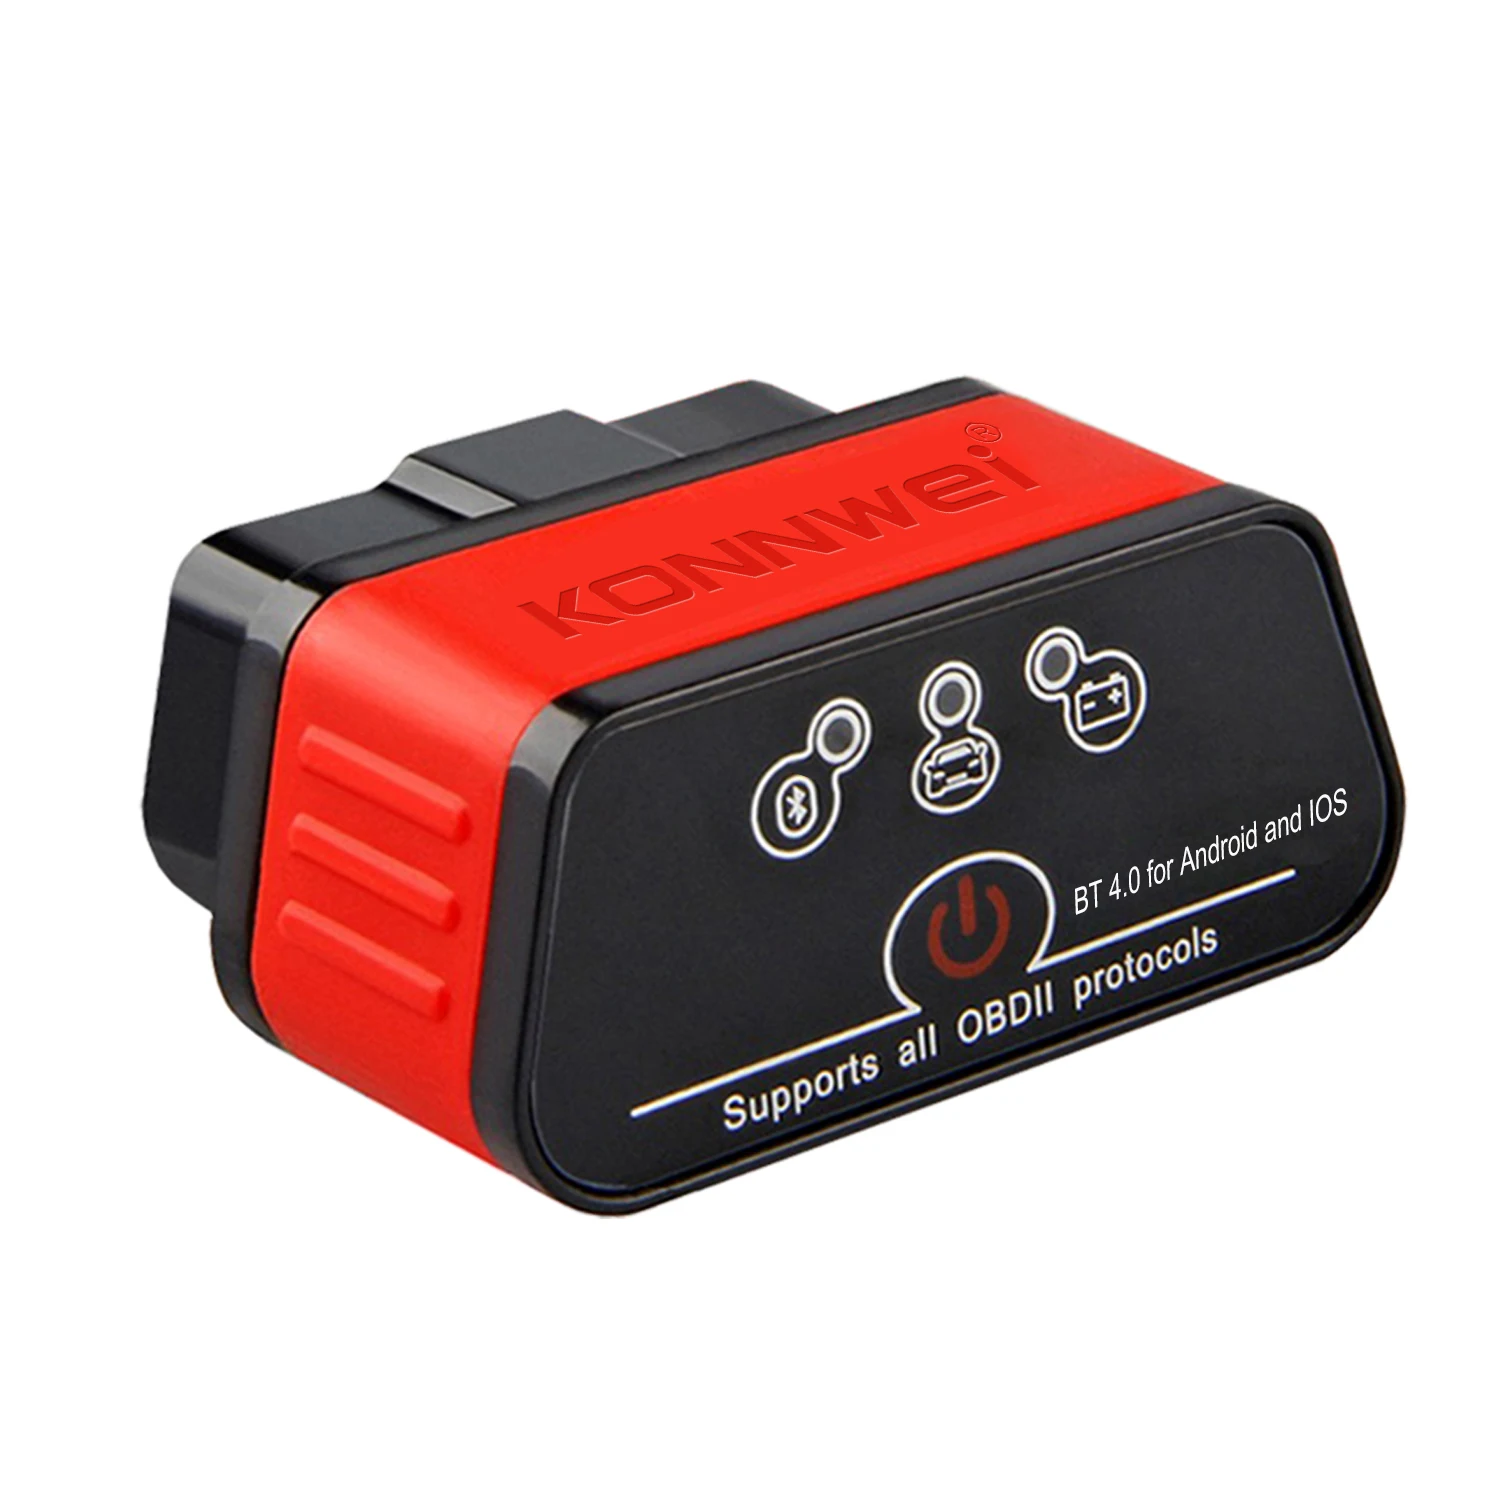 KONNWEI kw903 ELM327 WiFi OBD2 Code Reader Diagnostic Scan Tool für iPhone Android PC Auto Code Scanner 